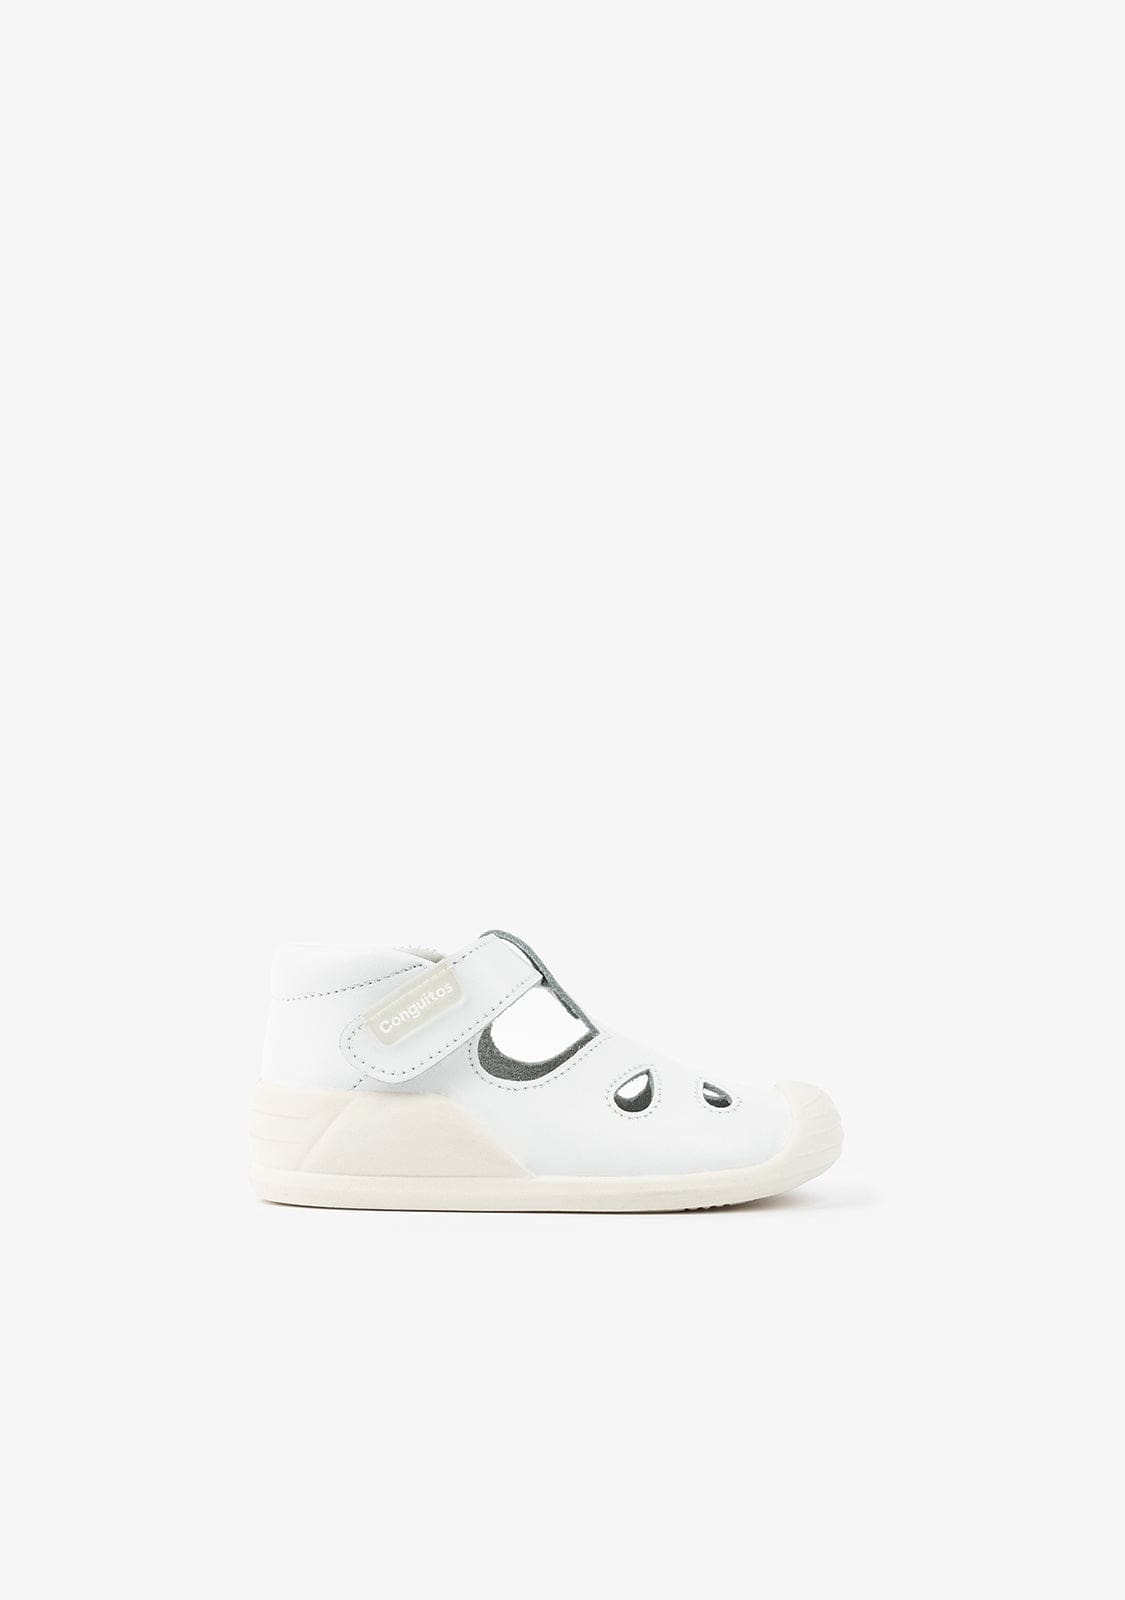 CONGUITOS Shoes Baby's White First Steps Shoes